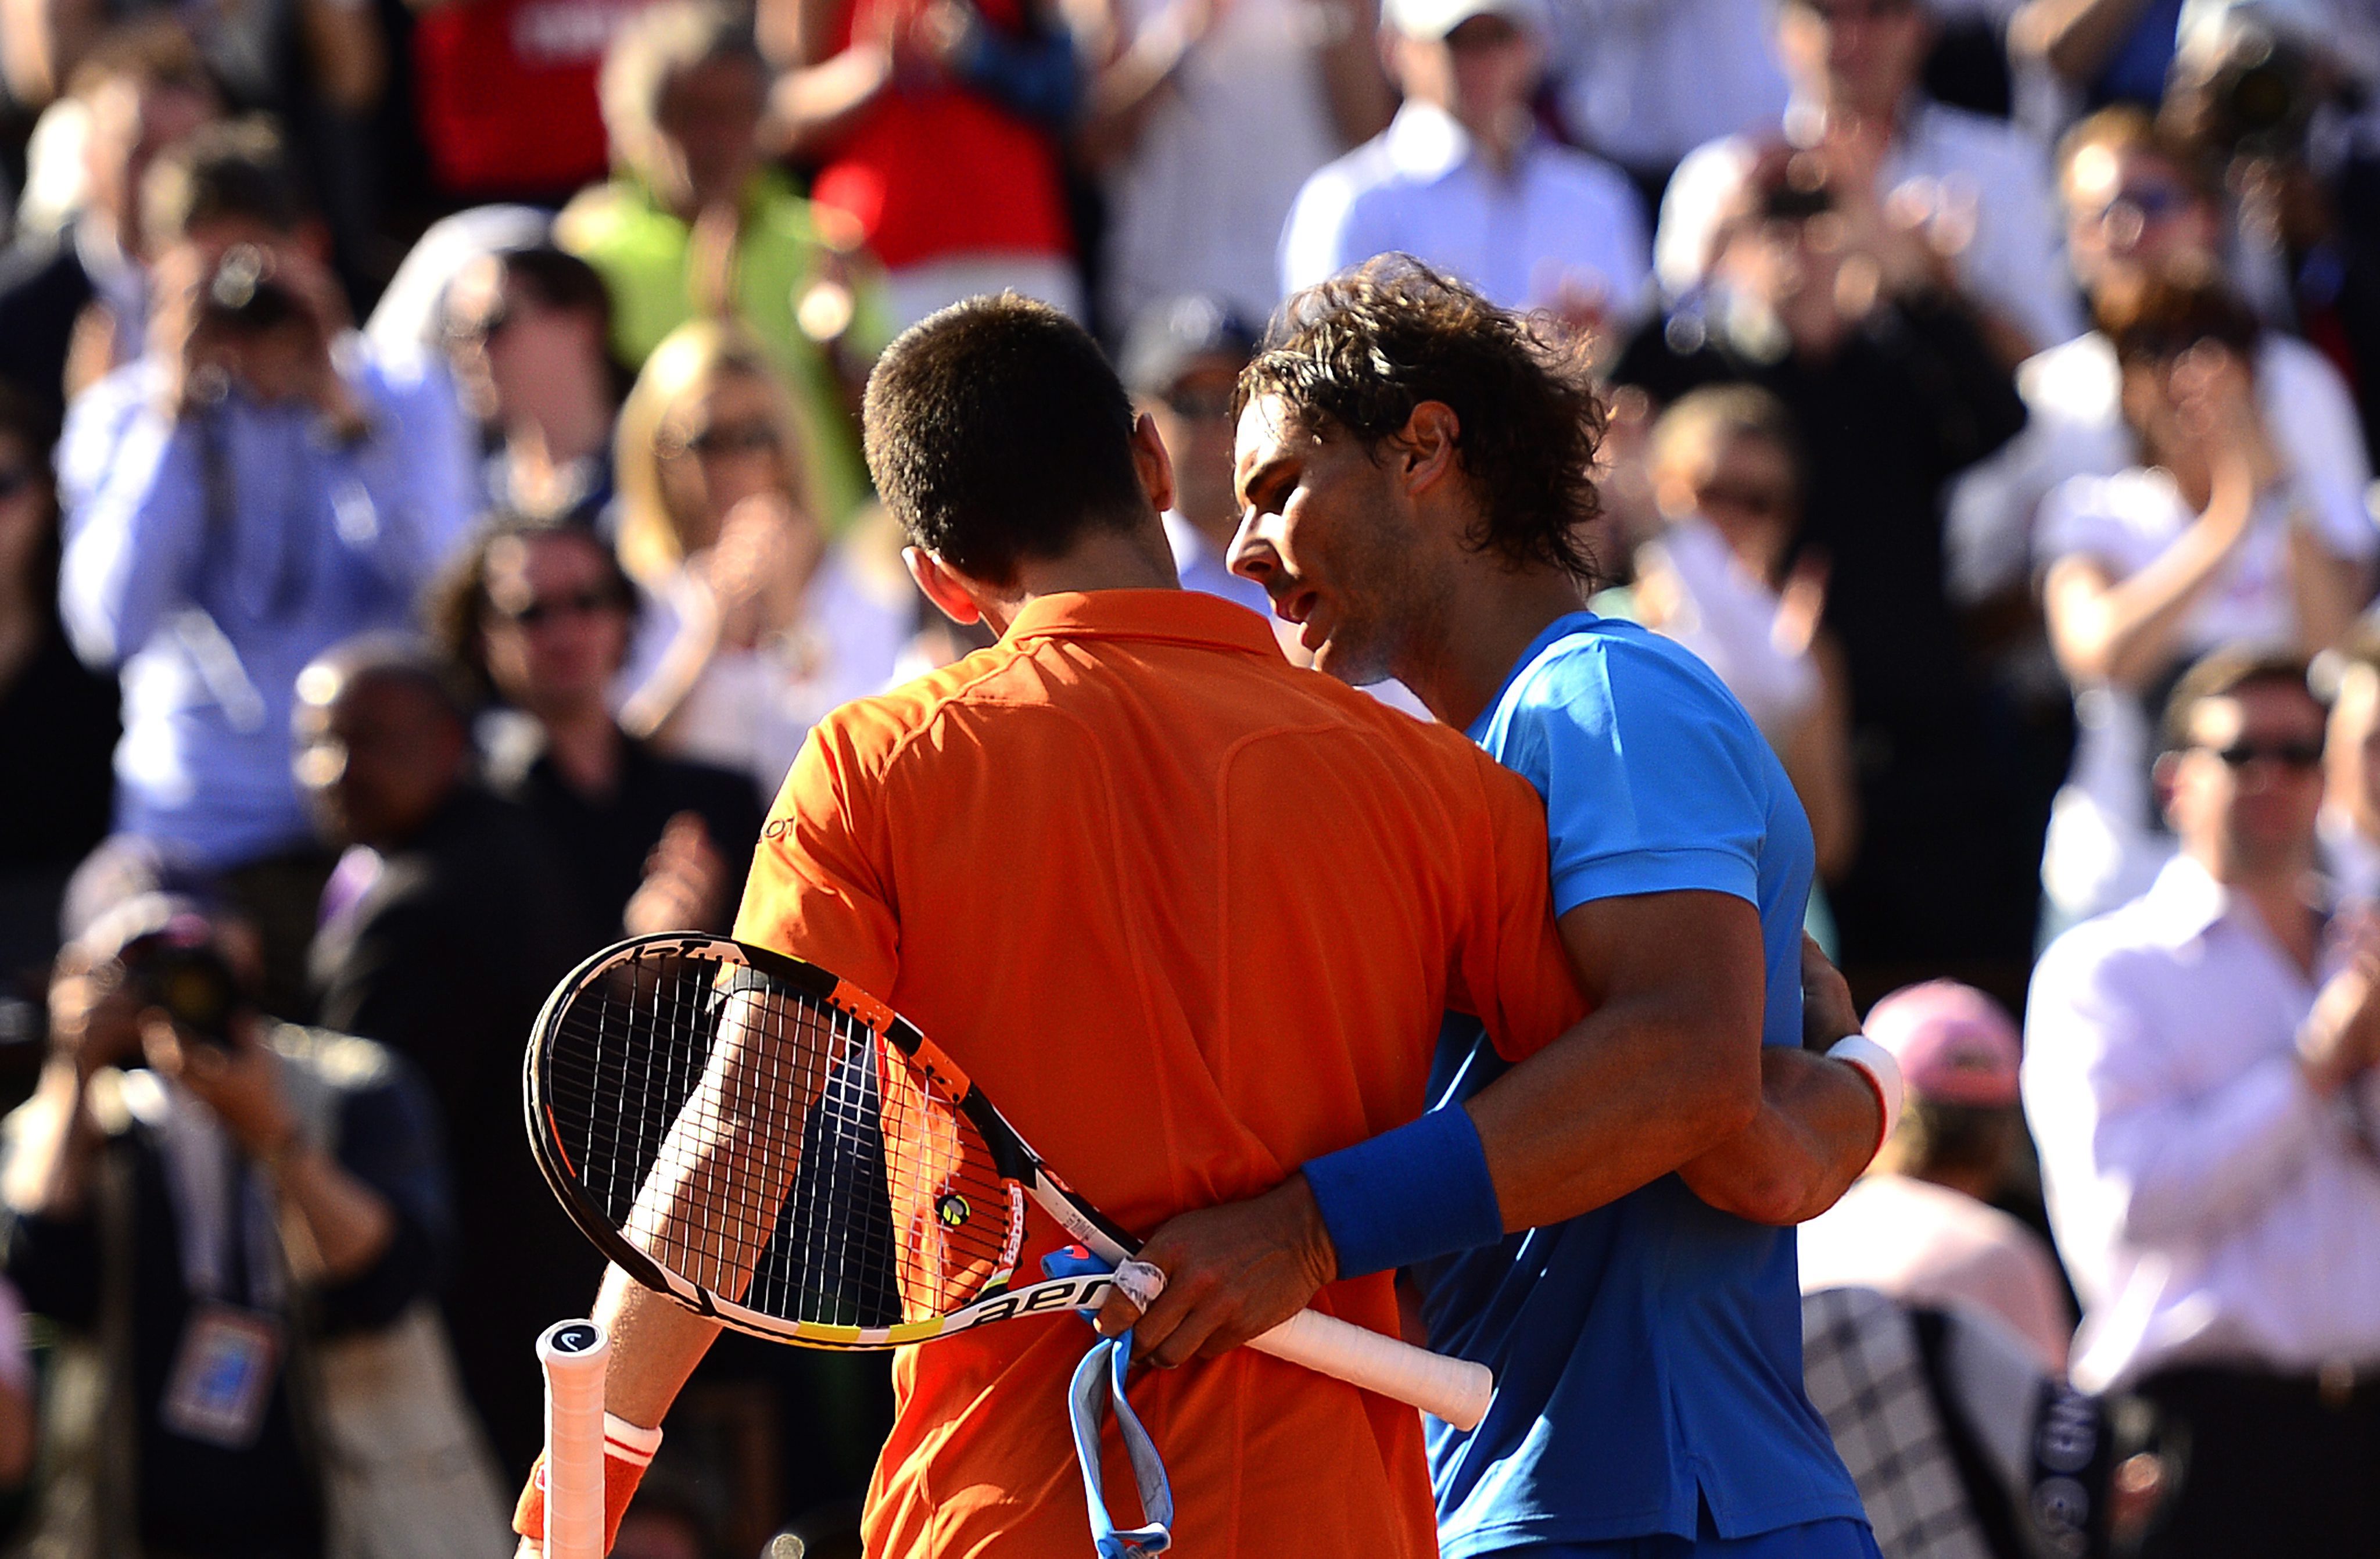 Novak Djokovic of Serbia hugs Rafael Nadal after beating the "King of Clay" in straight sets in their quarter-final match at Roland Garros.  Photo: EPA